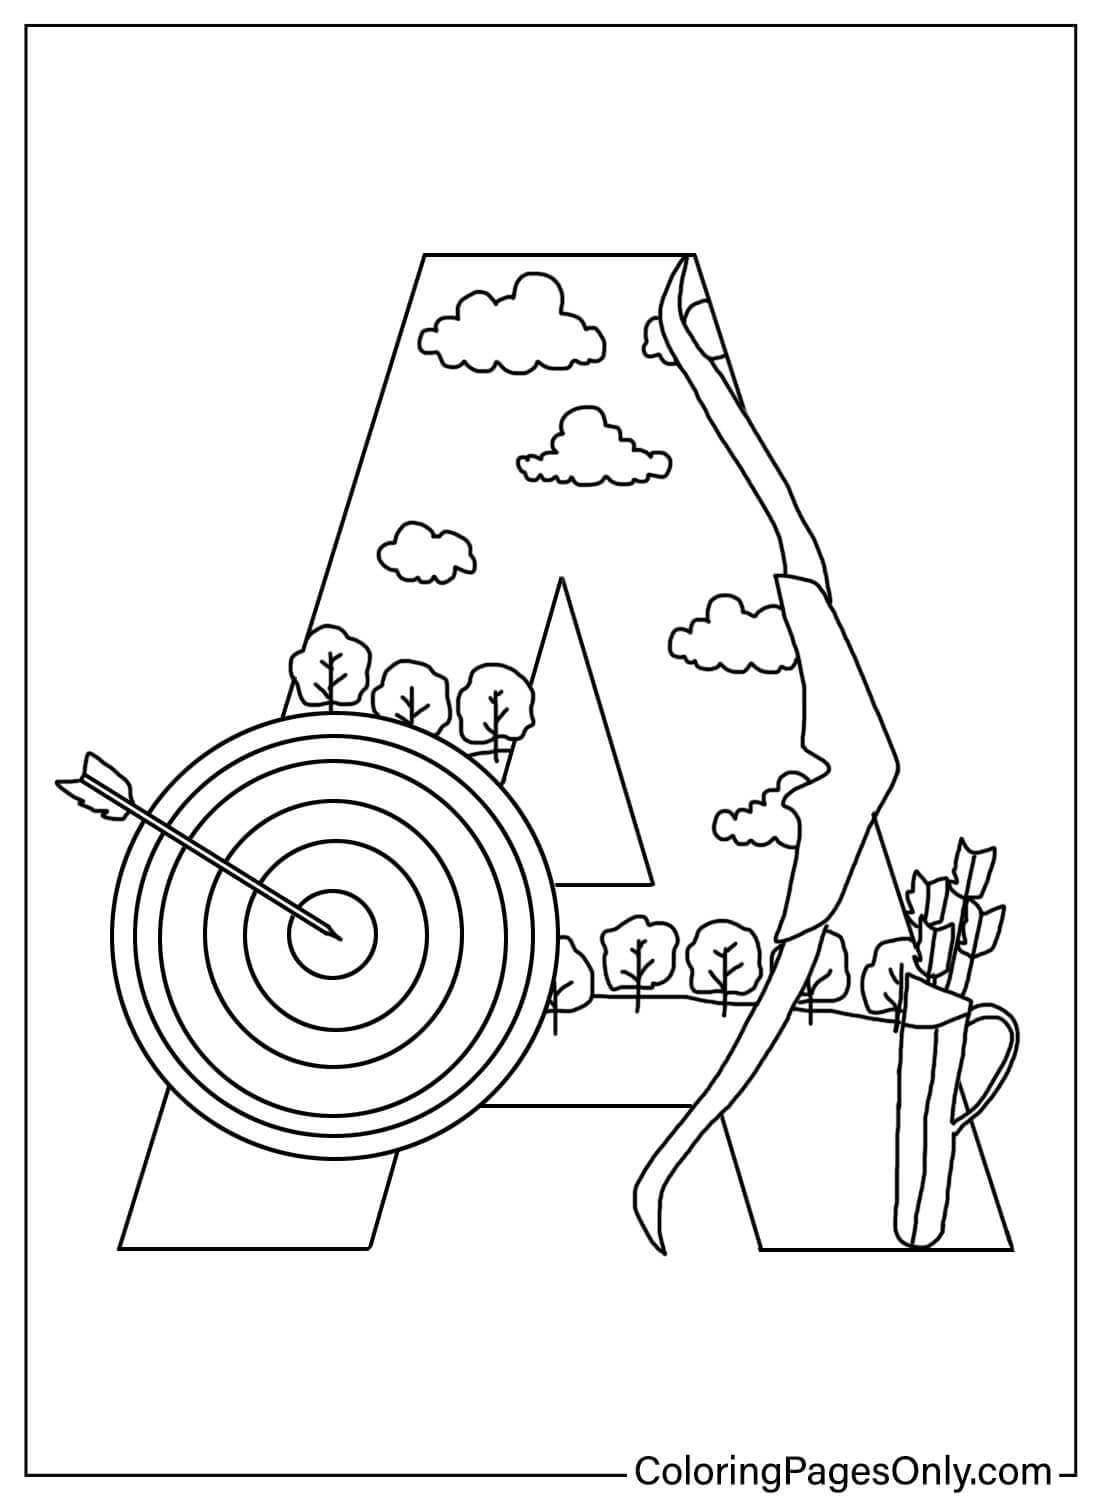 Letter A Free Coloring Page from Letter A